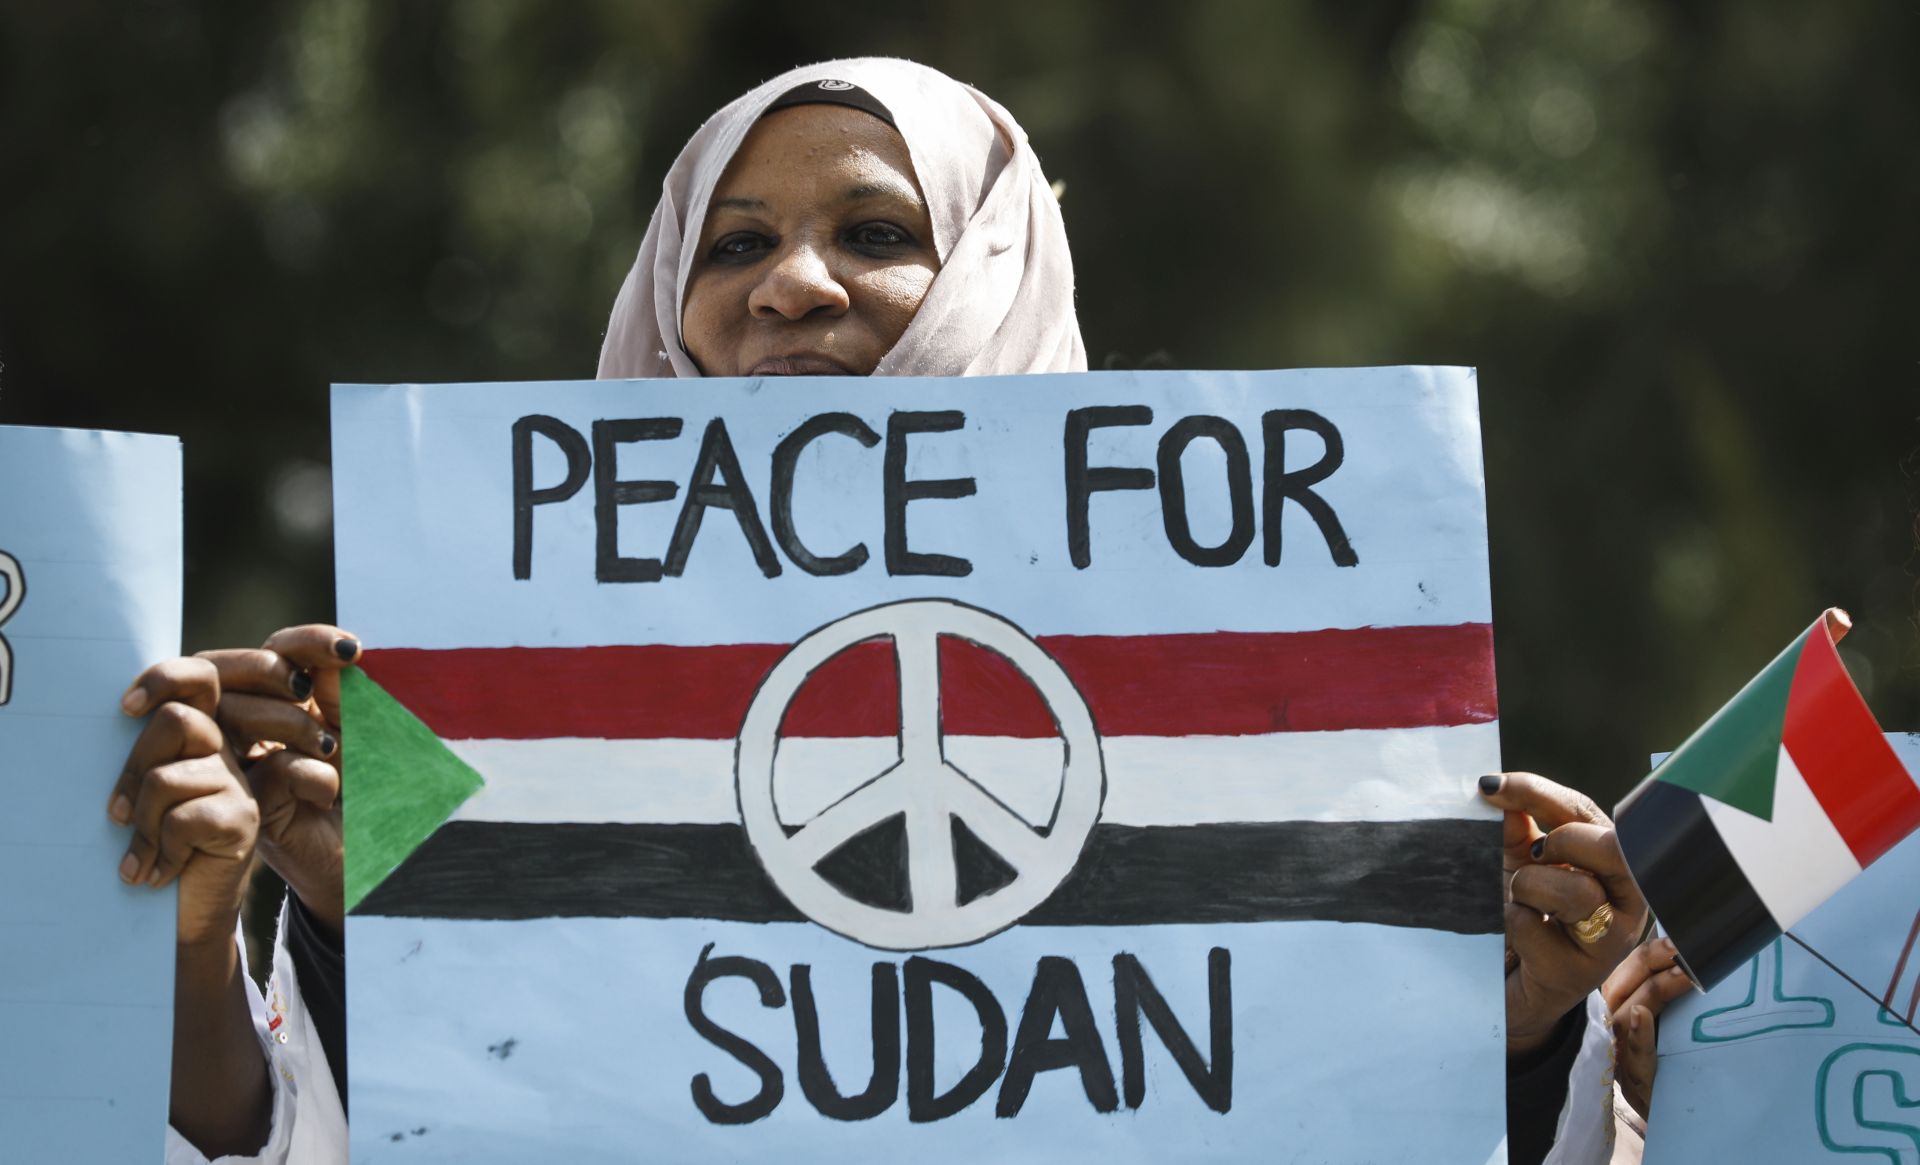 epa07657796 A Sudanese woman looks on with a placard during a protest against Sudan's crackdown on pro-democracy protesters, in Nairobi, Kenya, 19 June 2019. Some 100 people gathered in downtown Nairobi to mourn those who were killed by the Sudanese security forces in Khartoum on 03 June 2019. Kenyan police dispersed the gathering with tear gas.  EPA/DAI KUROKAWA